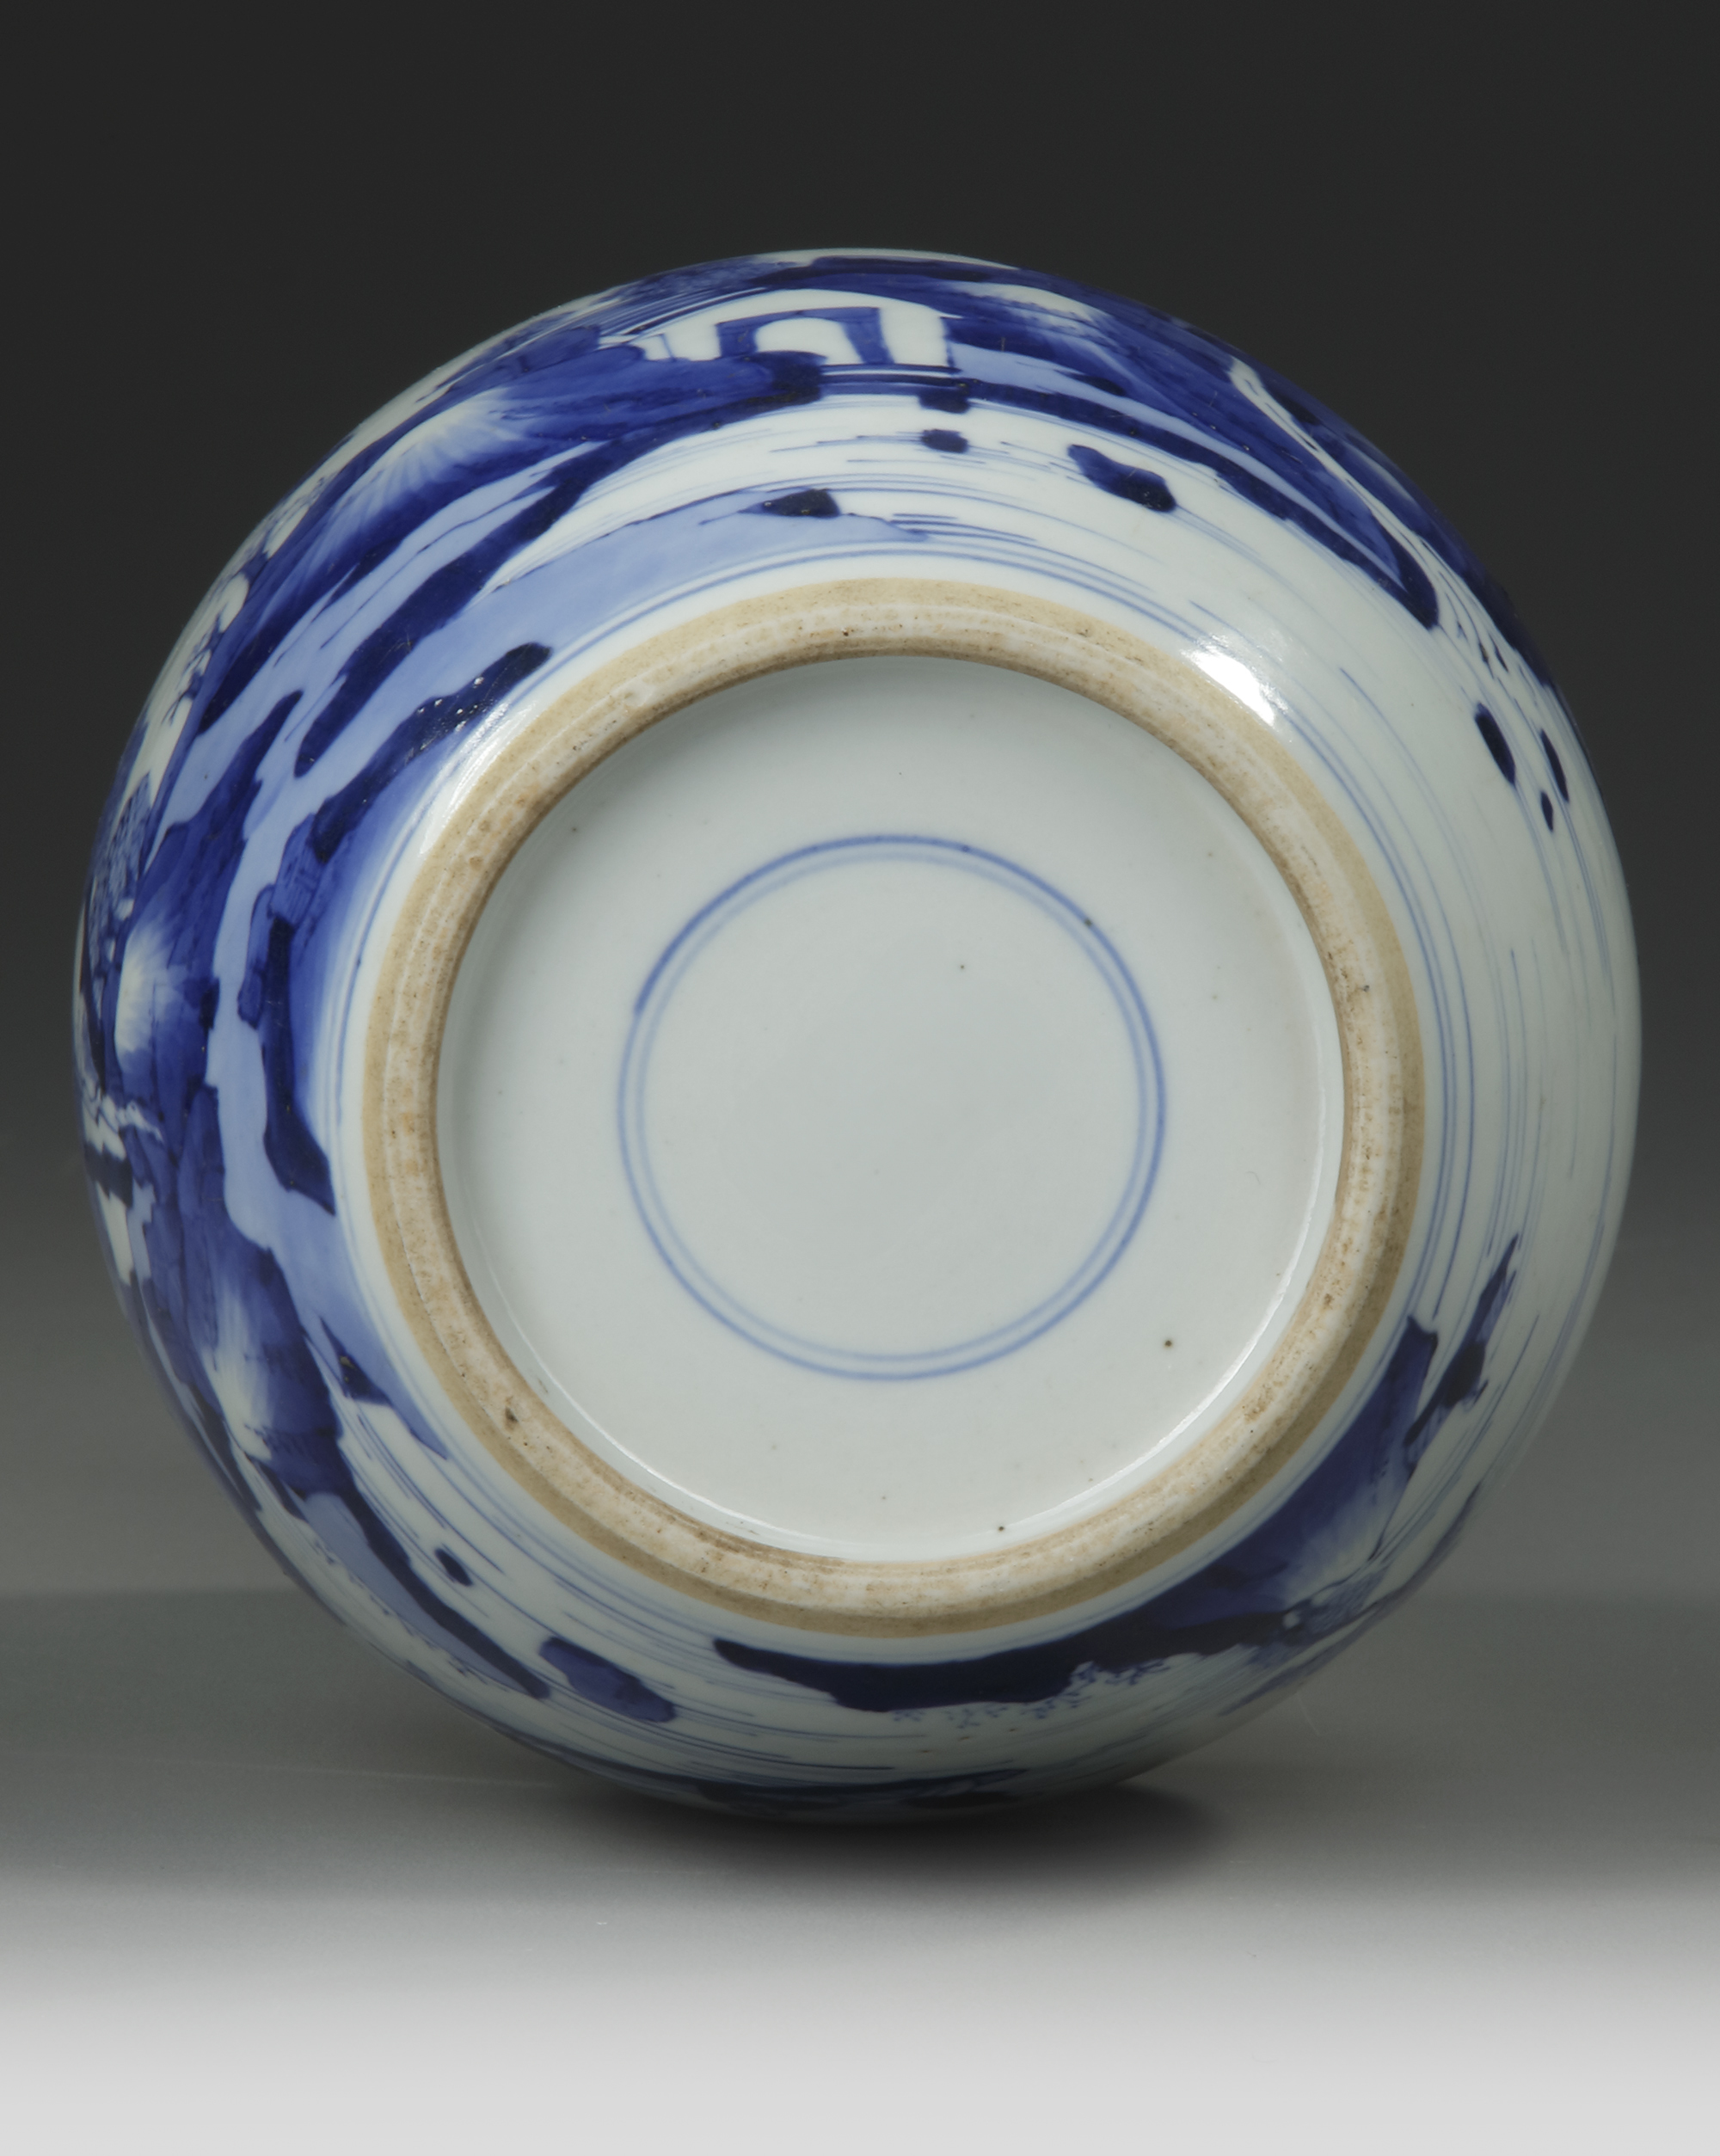 A CHINESE BLUE AND WHITE BOTTLE VASE, QING DYNASTY (1644-1911) - Image 4 of 4